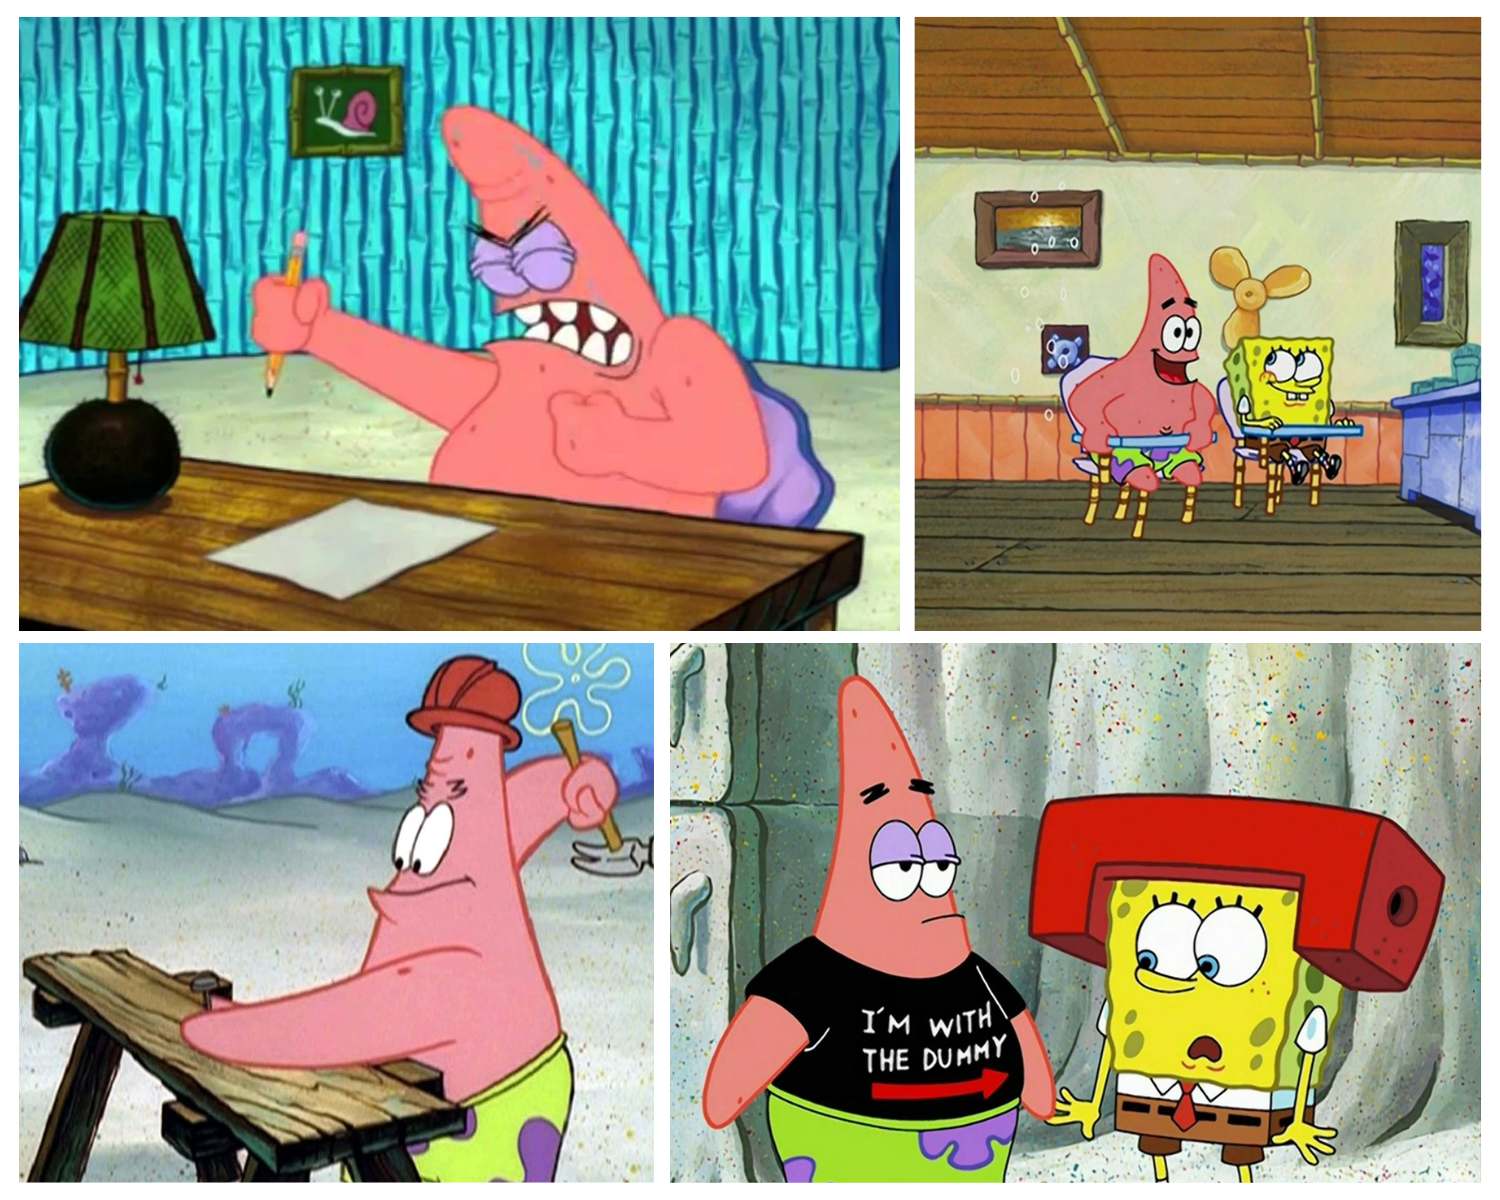 Patrick Star's comical attempt at being sophisticated